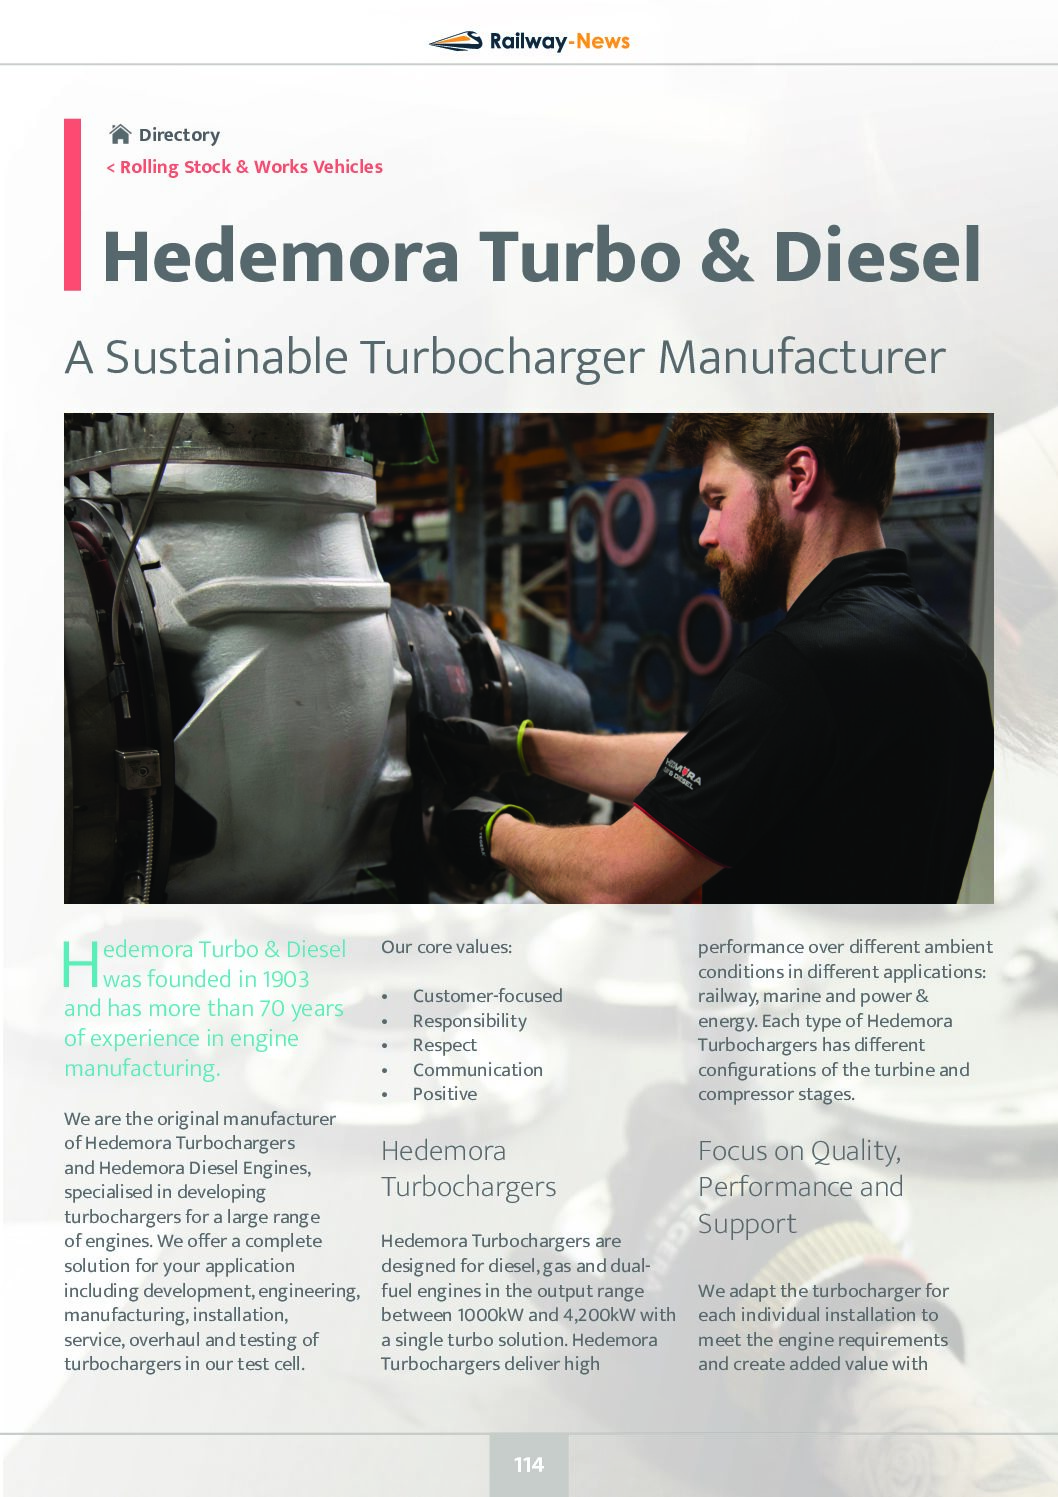 A Sustainable Turbocharger Manufacturer